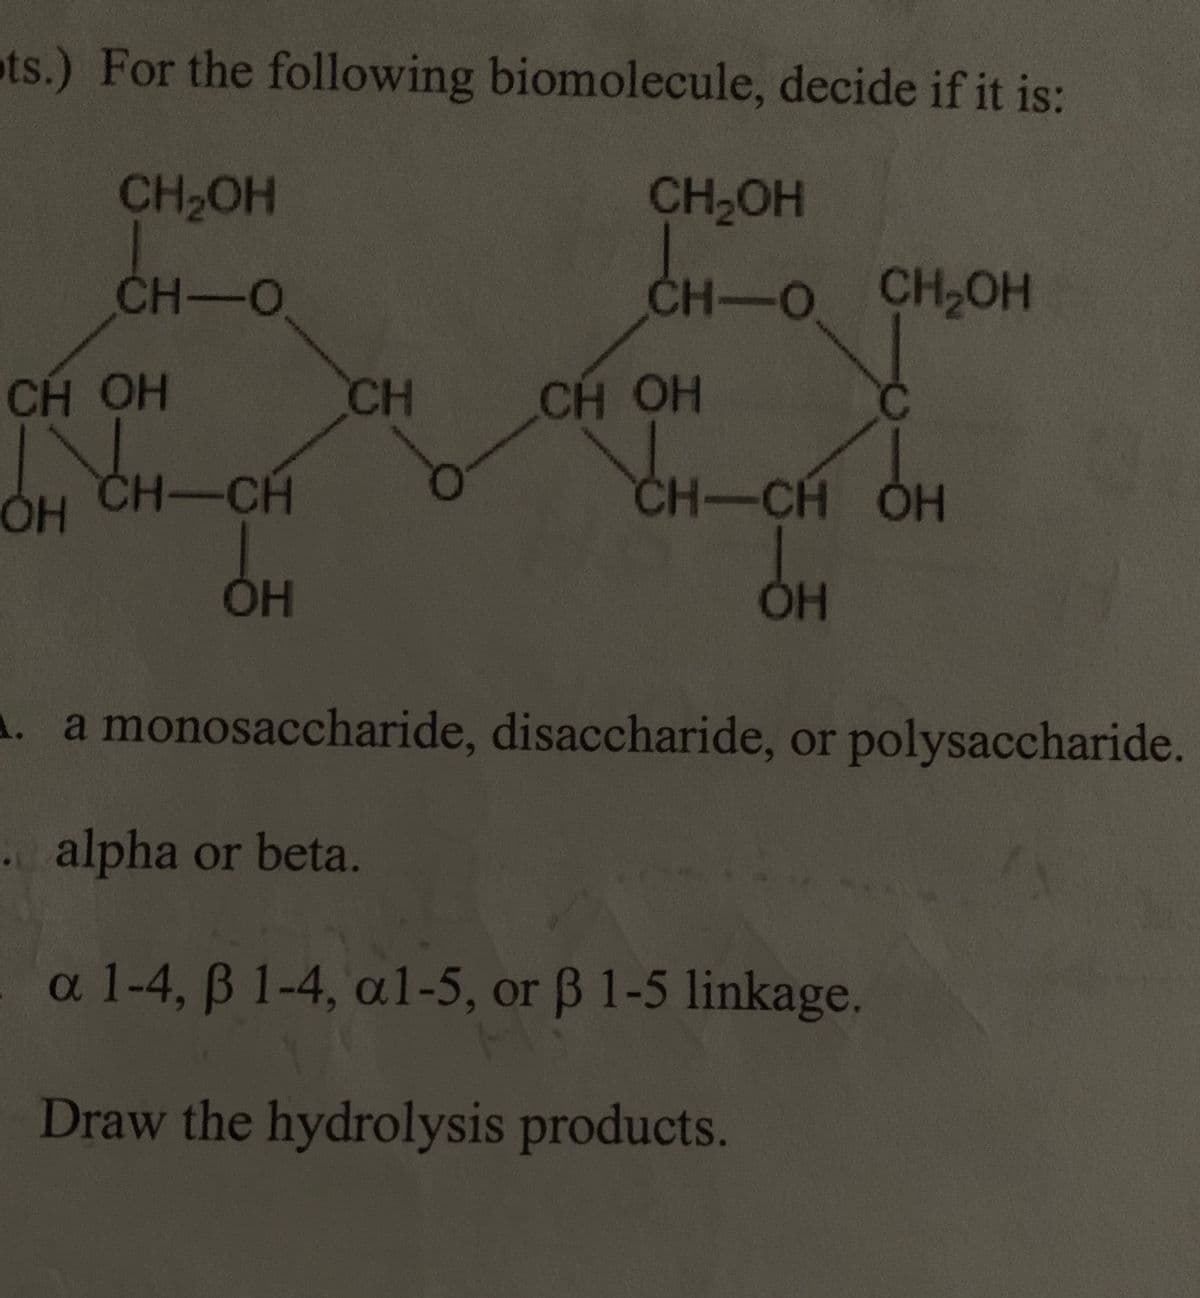 ts.) For the following biomolecule, decide if it is:
CH₂OH
CH-O
ㅎㅎ
CH OH
OH CH-CH
OH
CH
CH₂OH
CH-O CH₂OH
CH OH
CH-CH OH
ОН
A. a monosaccharide, disaccharide, or polysaccharide.
alpha or beta.
a 1-4, ß 1-4, al-5, or ß 1-5 linkage.
Draw the hydrolysis products.